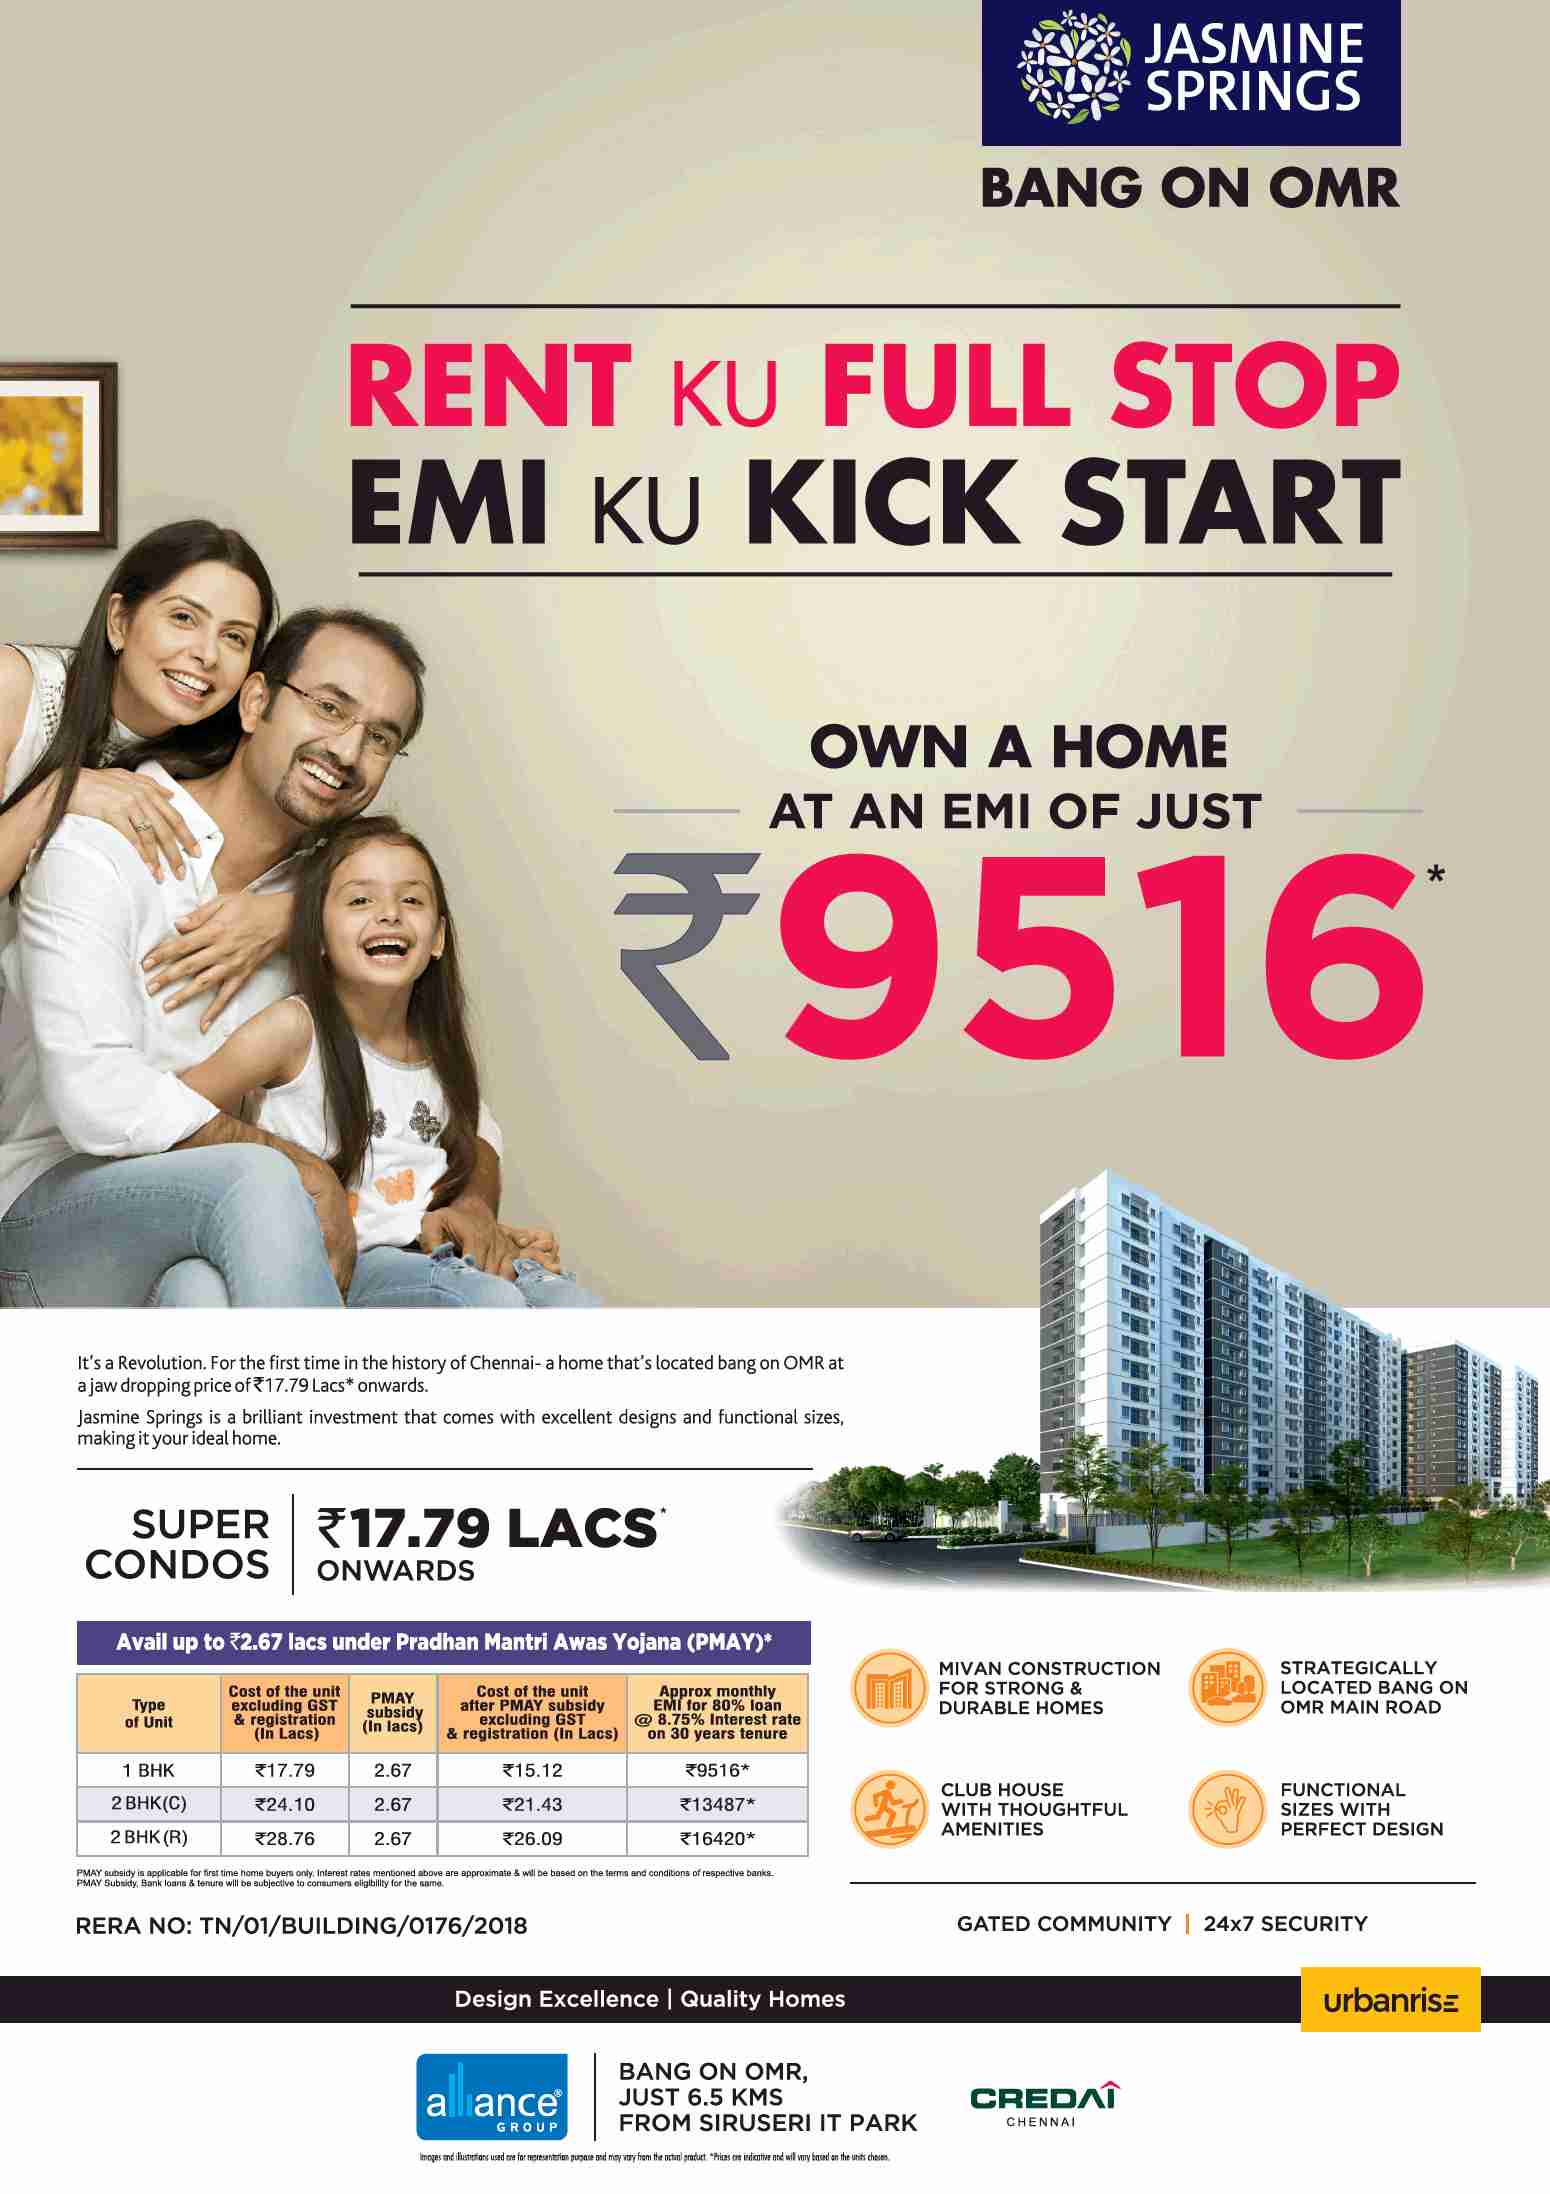 Own a home at an EMI of just Rs. 9516 at Alliance Jasmine Springs in Chennai